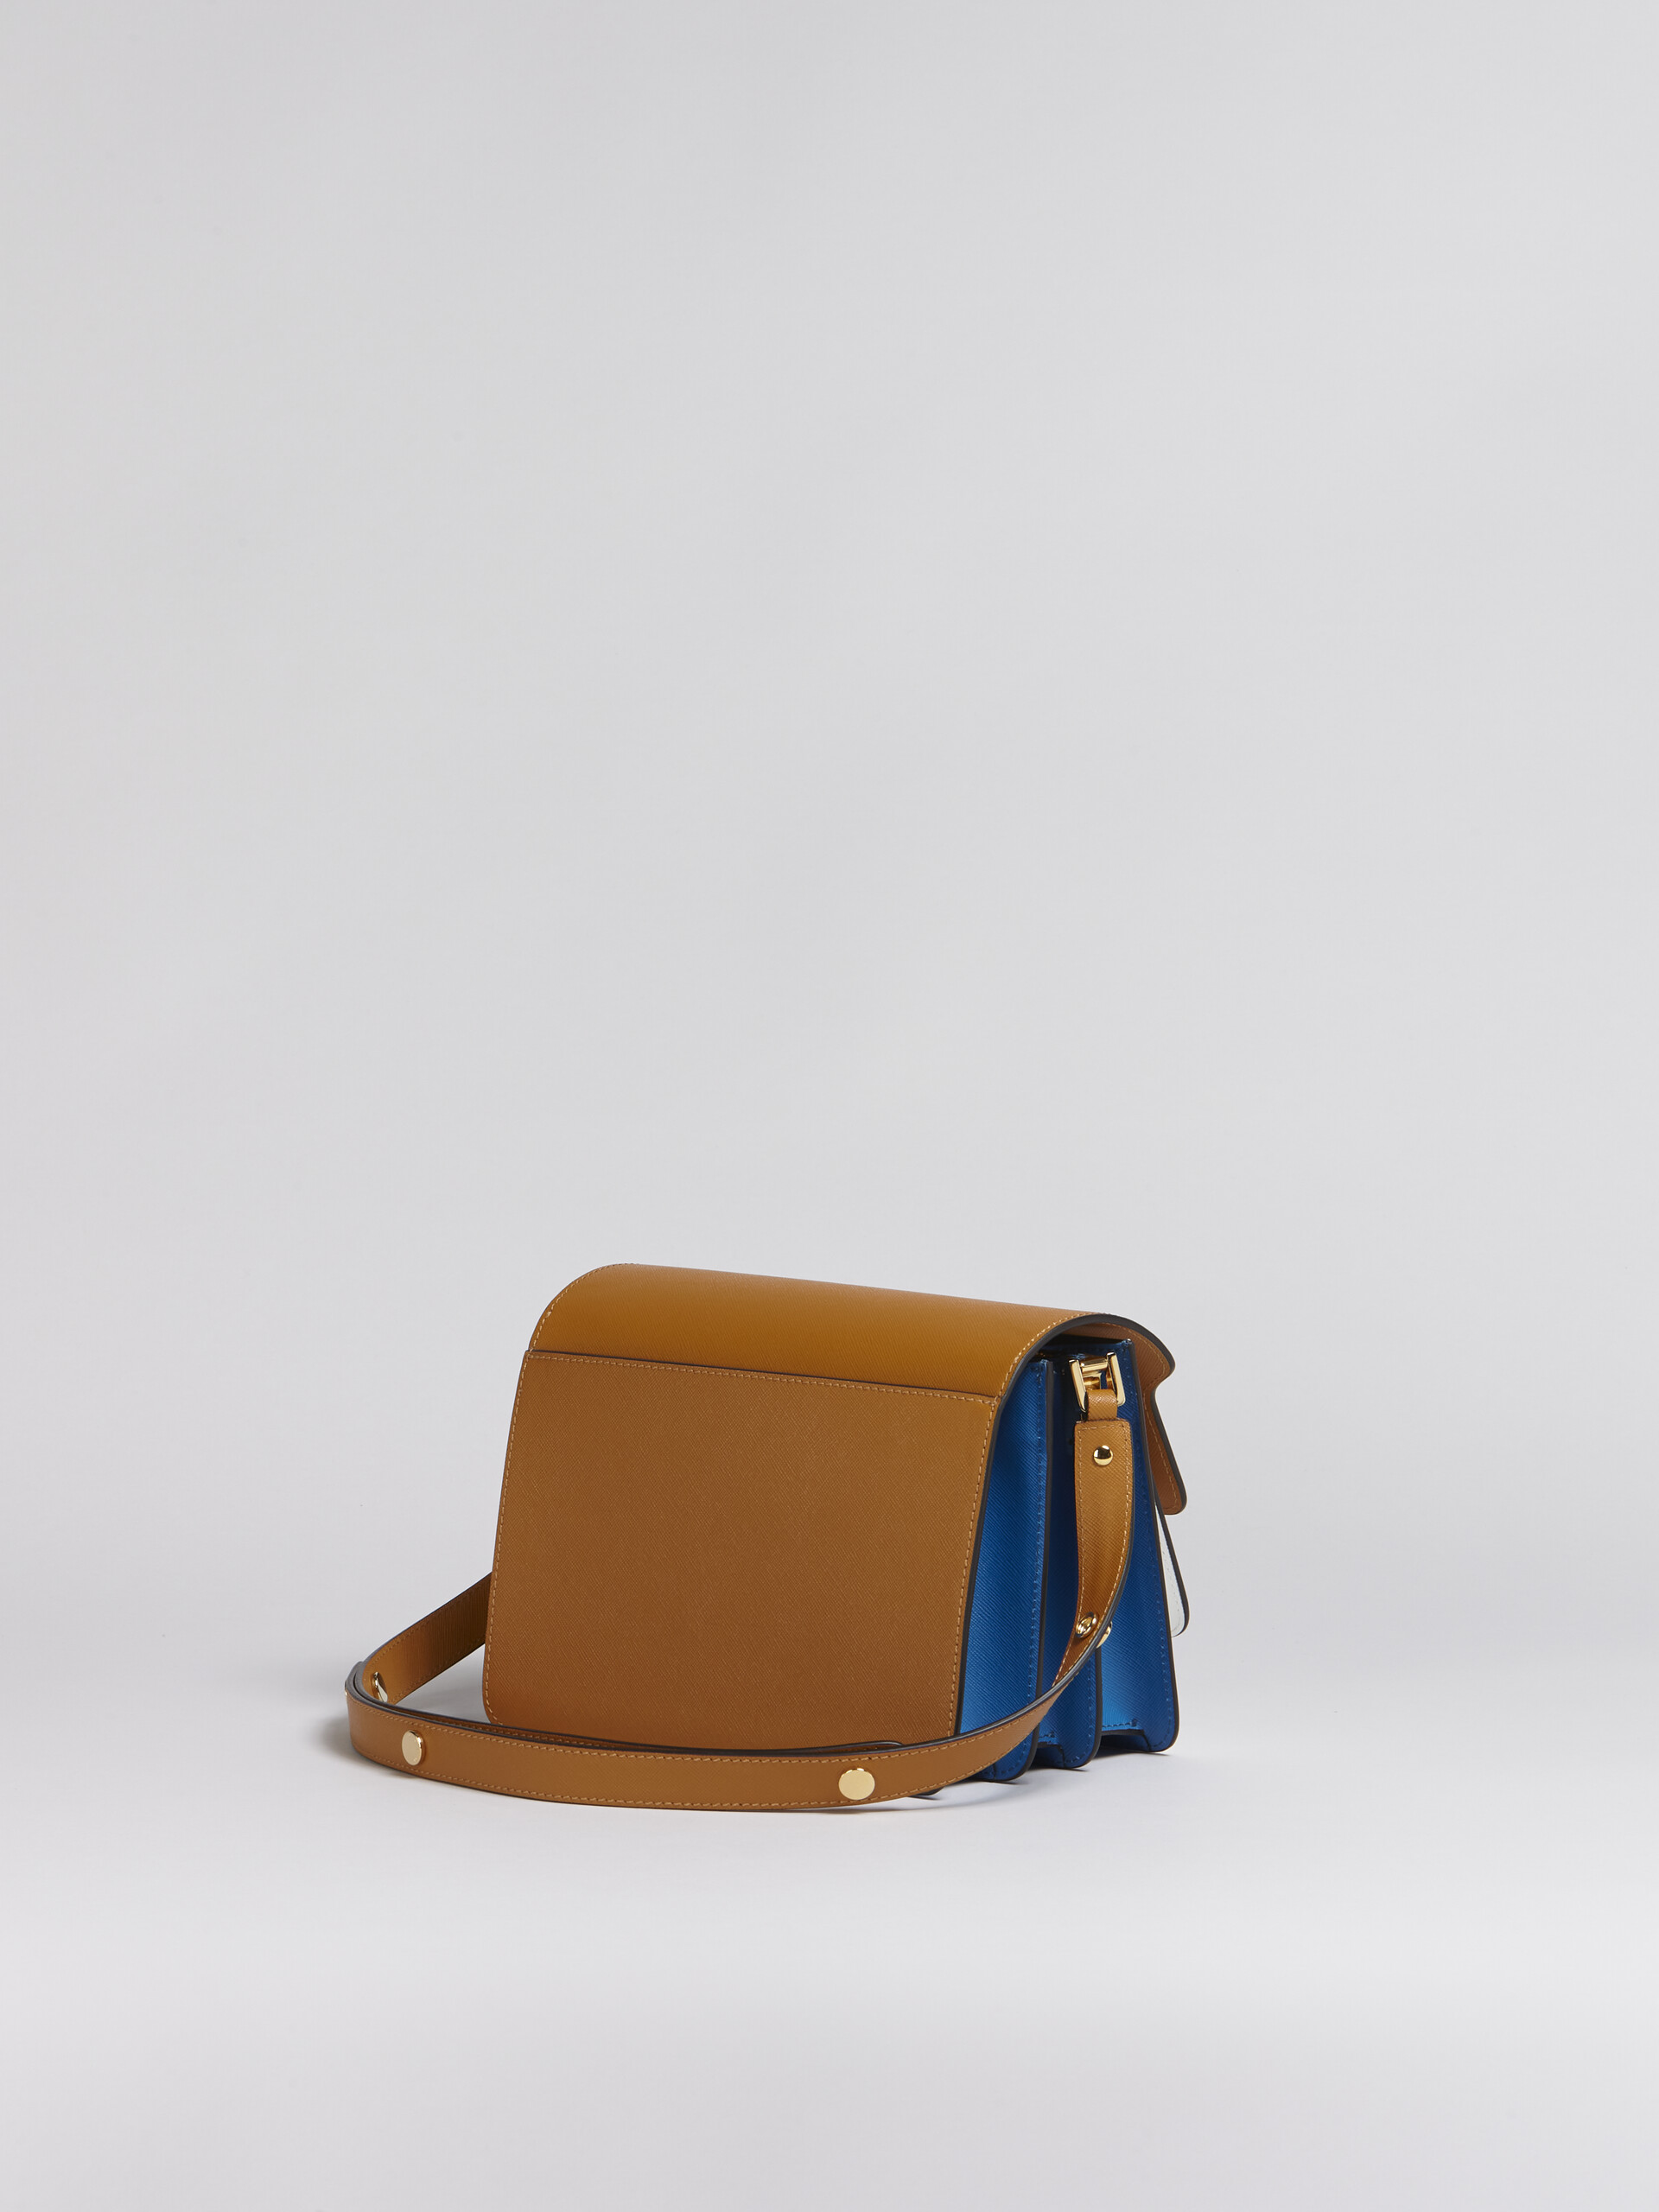 TRUNK medium bag in brown white and blue saffiano leather - Shoulder Bags - Image 2